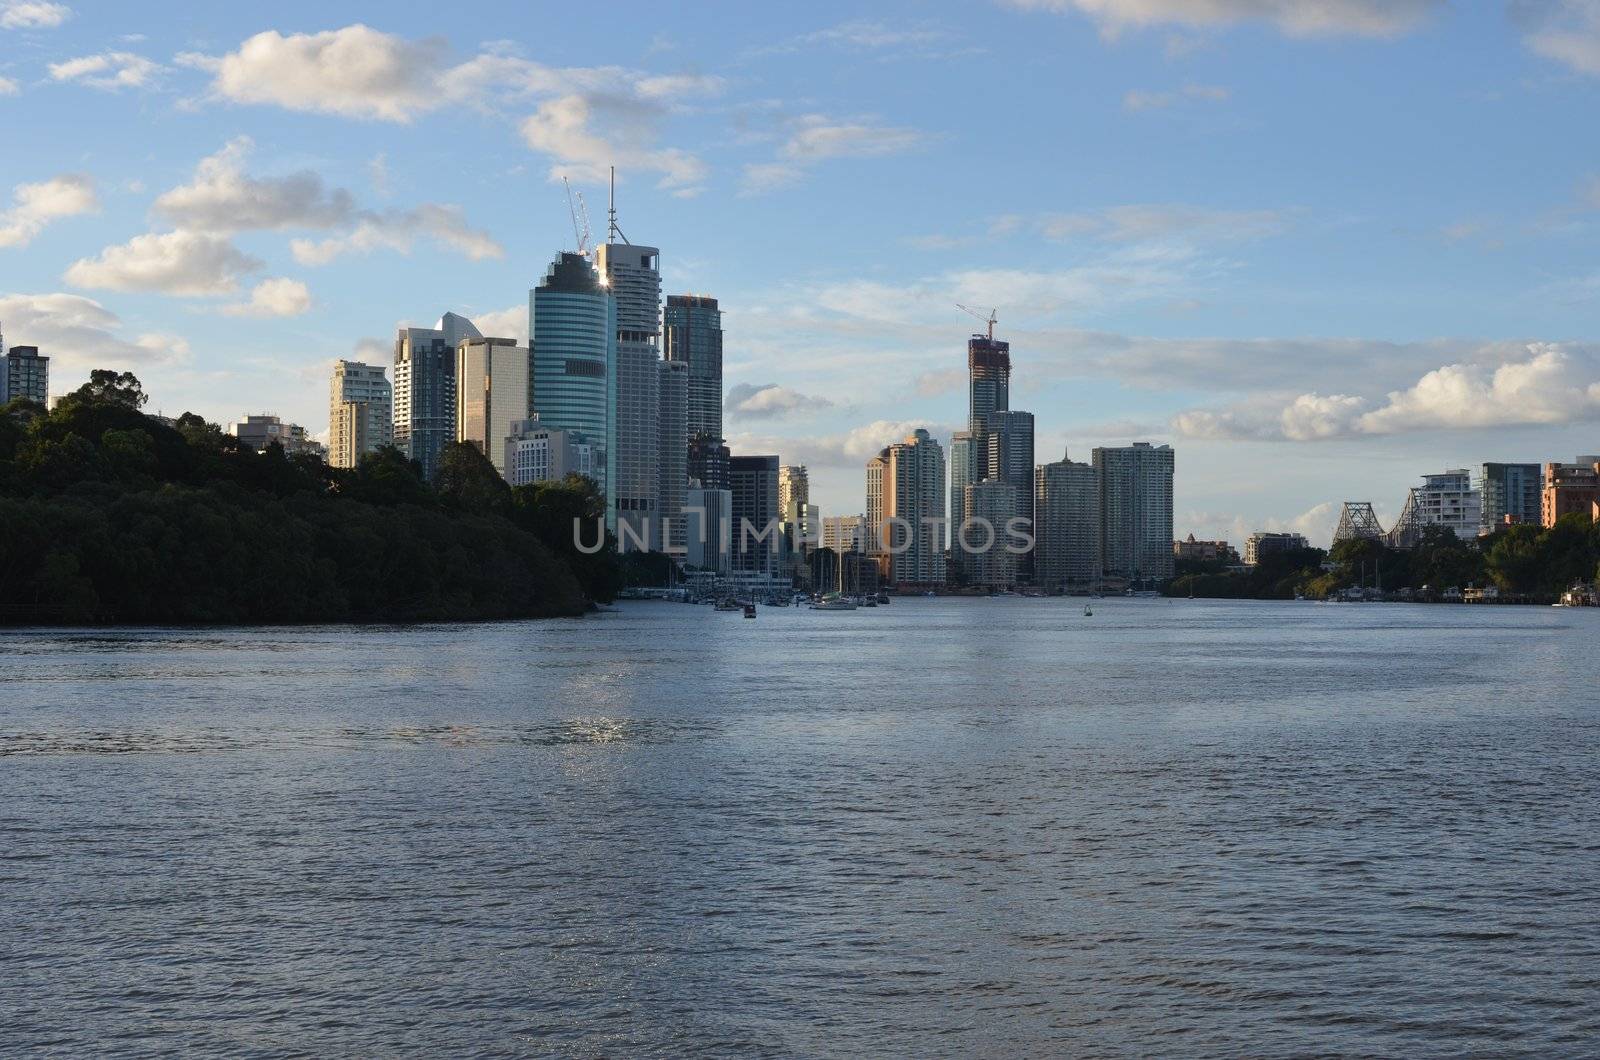 The Brisbane River and Brisbane City from Kangaroo Point. The city Botanic Gardens are to the left, the city centre in the middle and the Story Bridge can be seen to the far right.